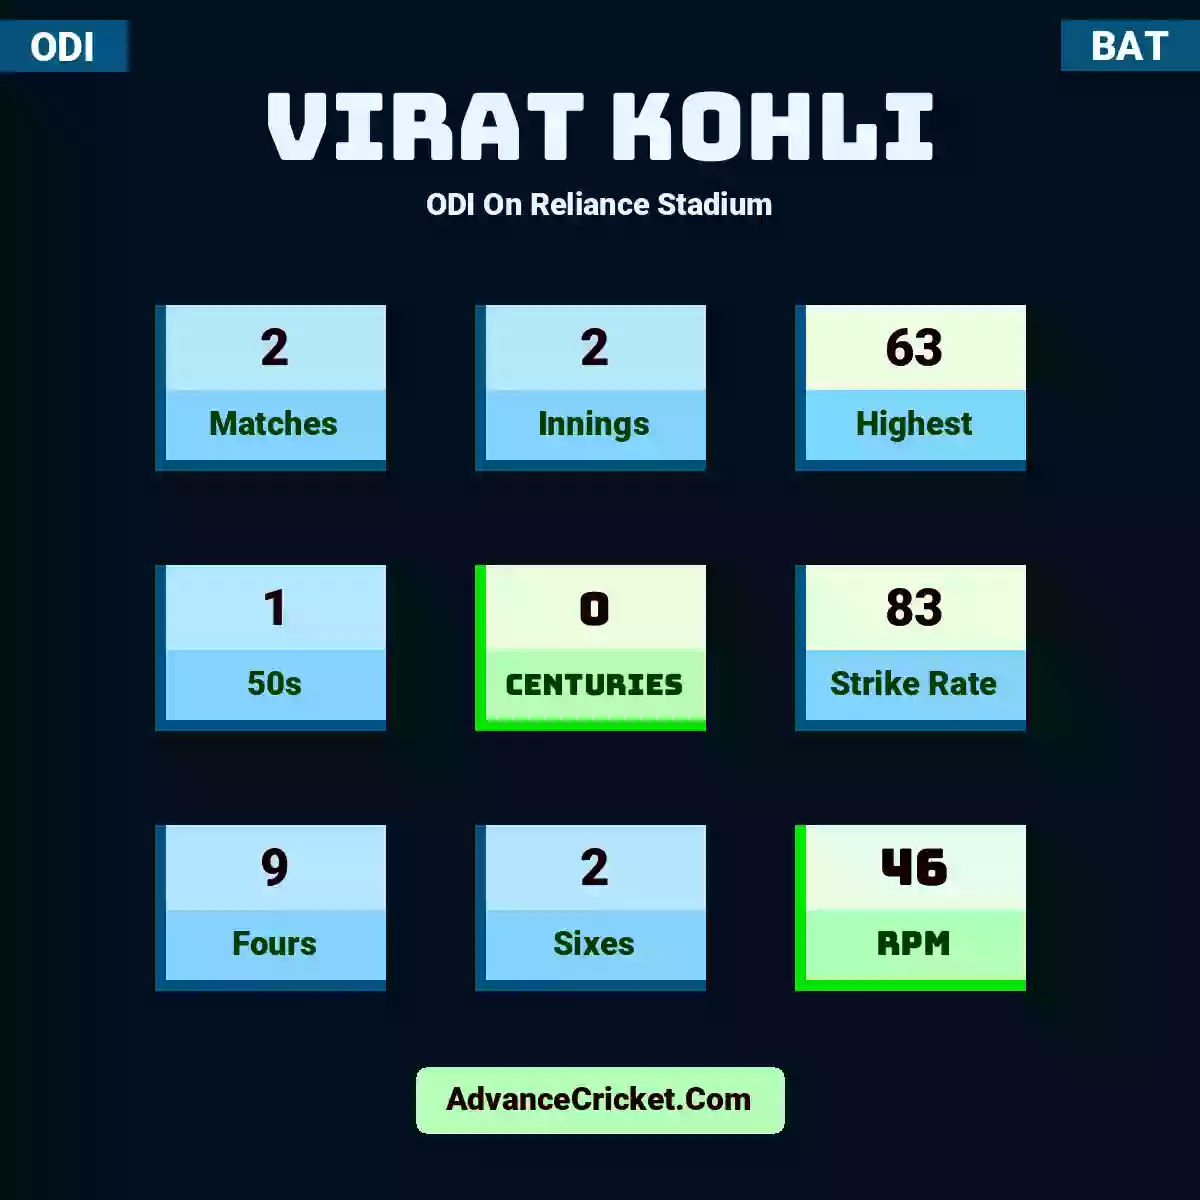 Virat Kohli ODI  On Reliance Stadium, Virat Kohli played 2 matches, scored 63 runs as highest, 1 half-centuries, and 0 centuries, with a strike rate of 83. V.Kohli hit 9 fours and 2 sixes, with an RPM of 46.